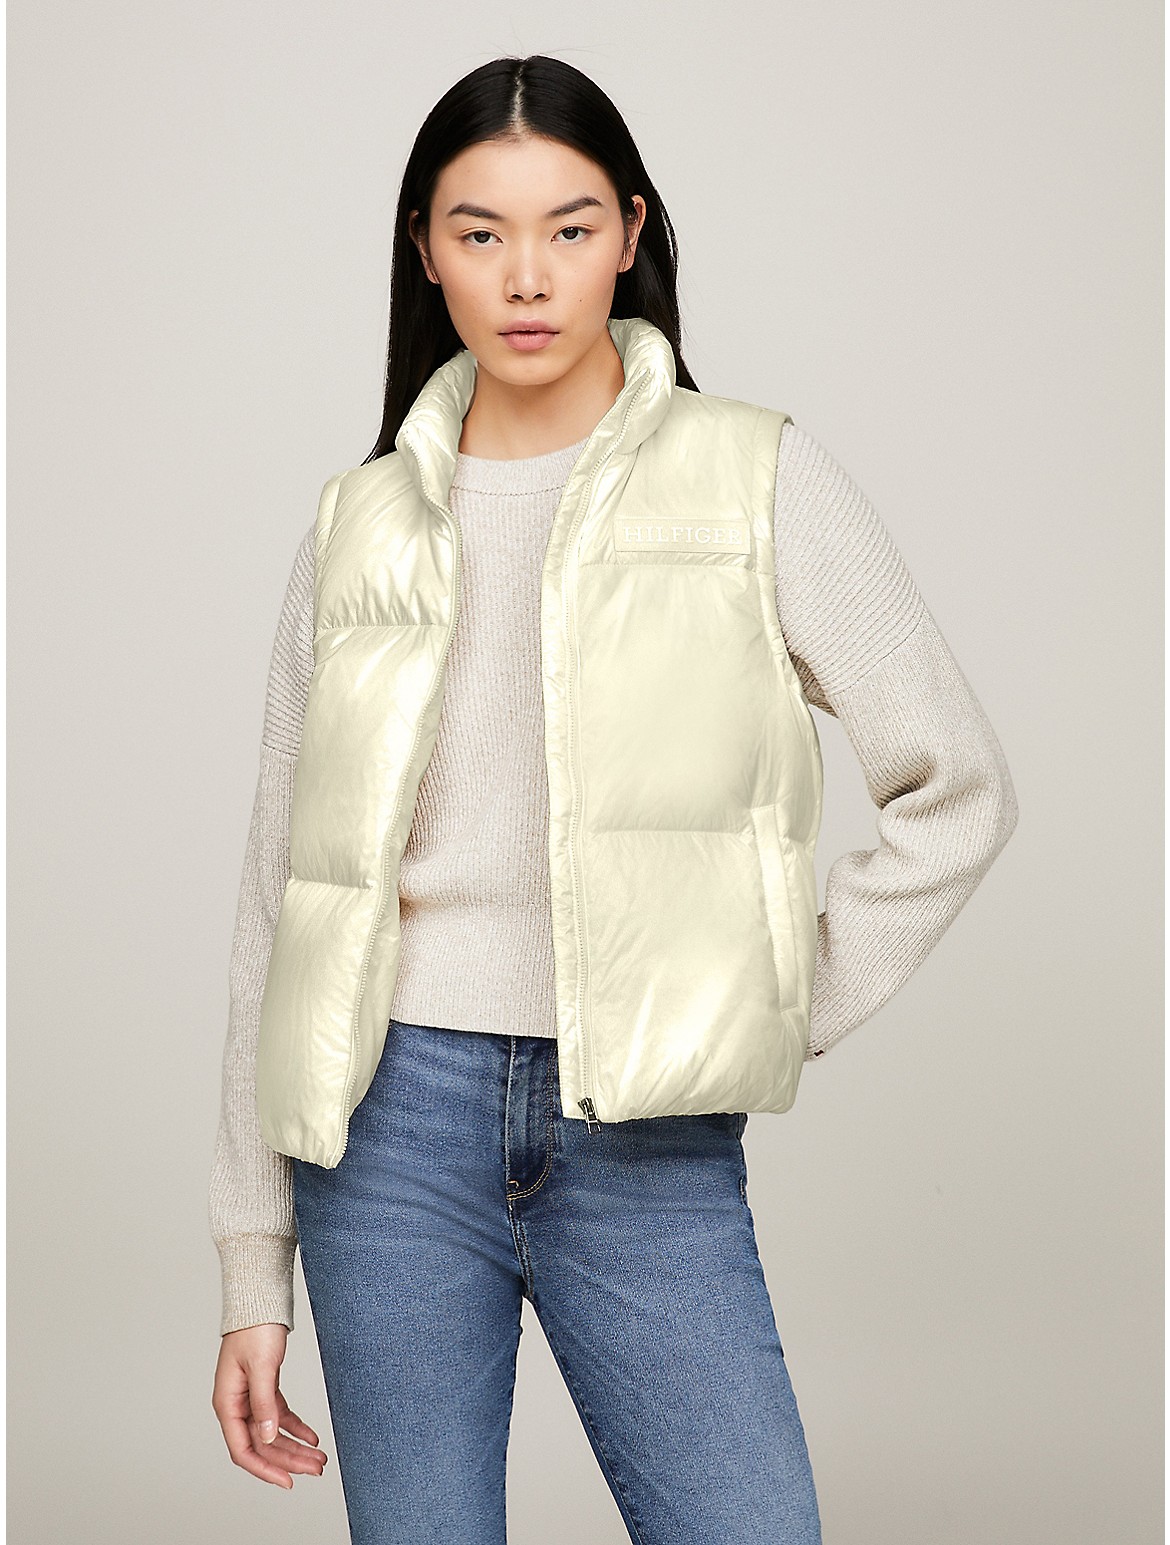 Tommy Hilfiger New York Glossy Puffer Vest In Calico